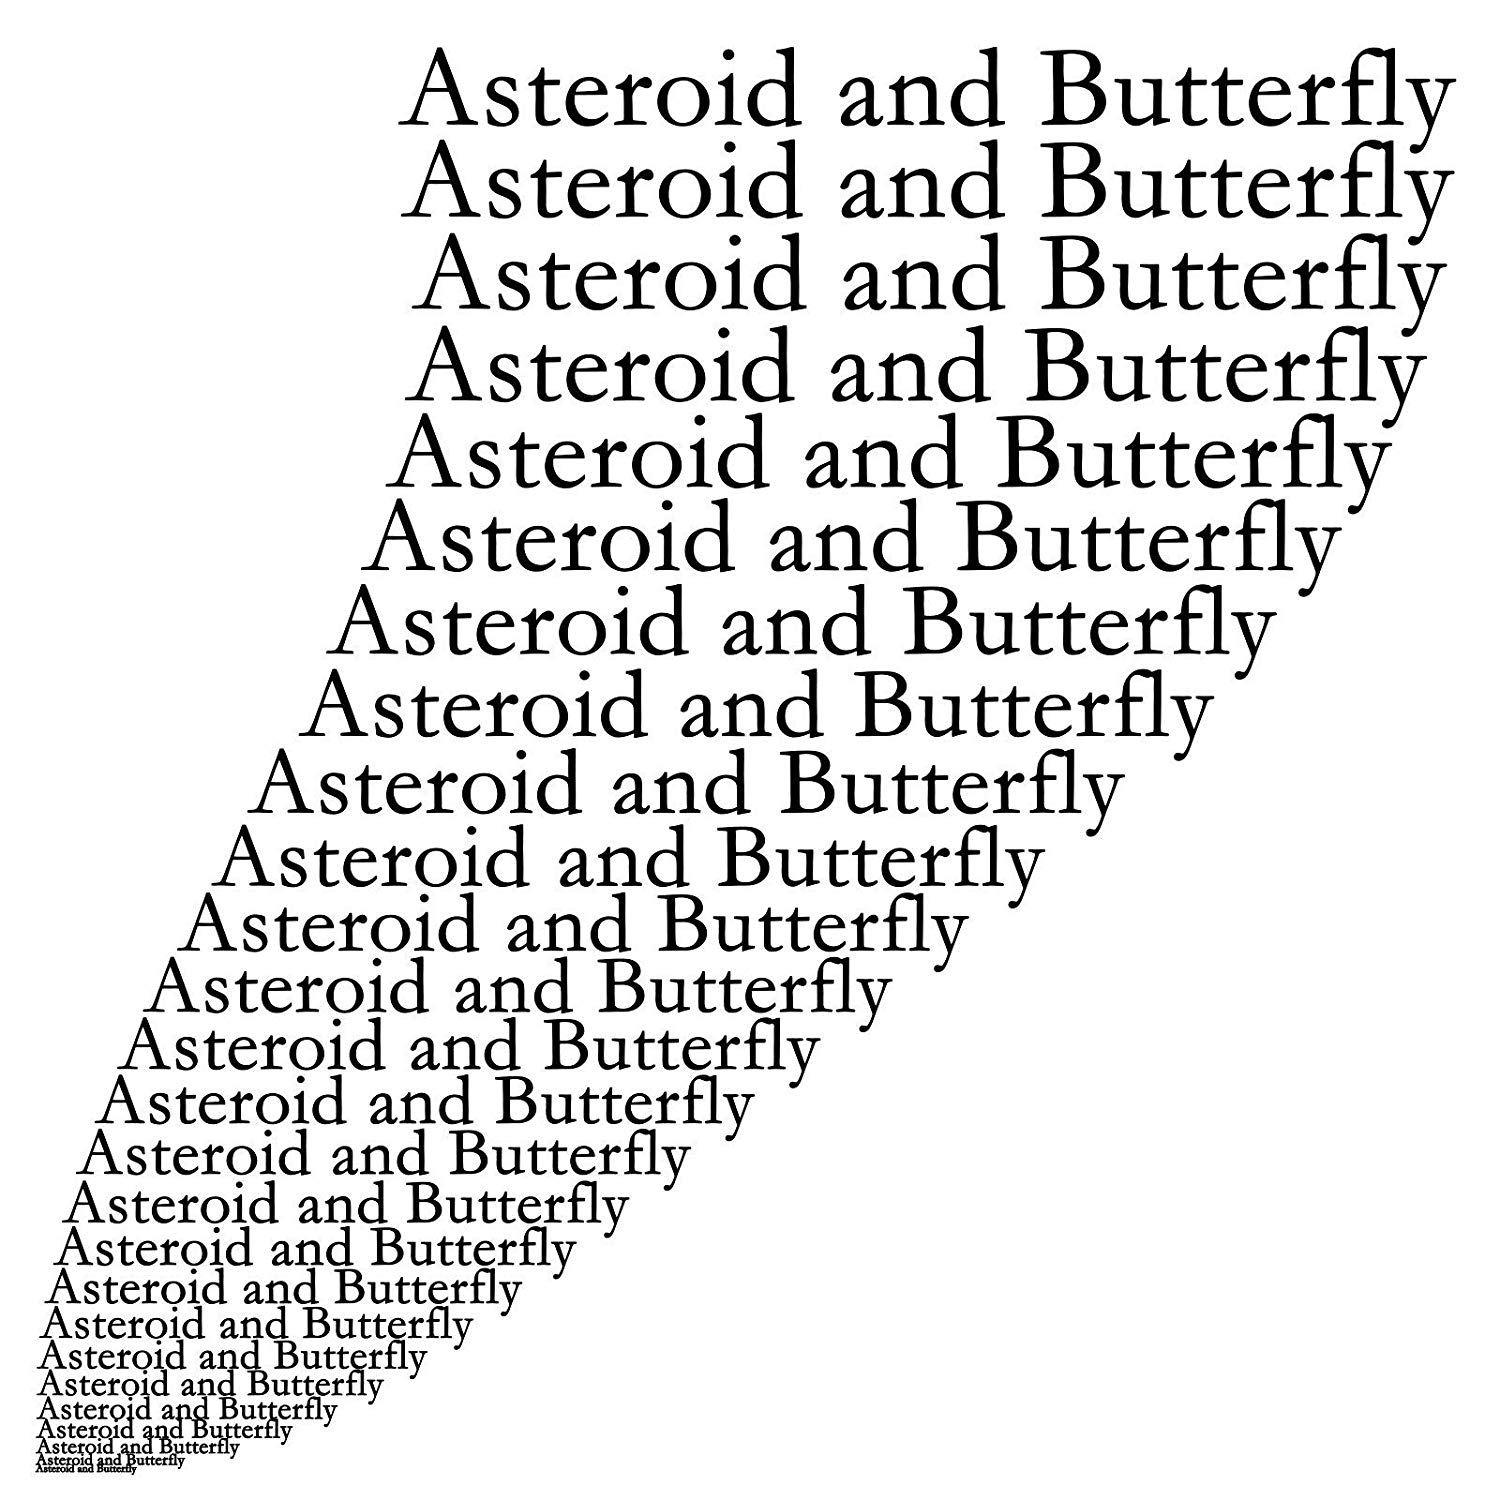 「Asteroid and Butterfly」